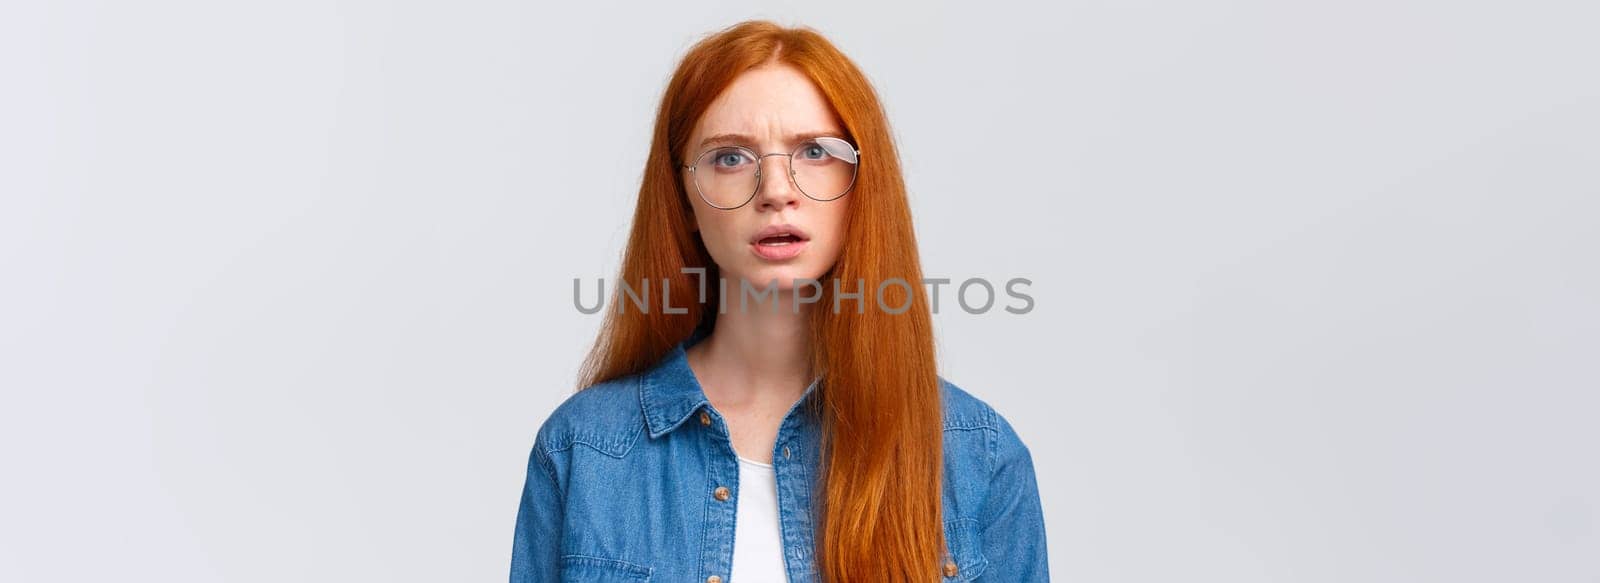 Confused and displeased, unsure redhead girl in glasses having conversation, talking look frustrated and slightly unconvinced, have doubts standing white background frowning.